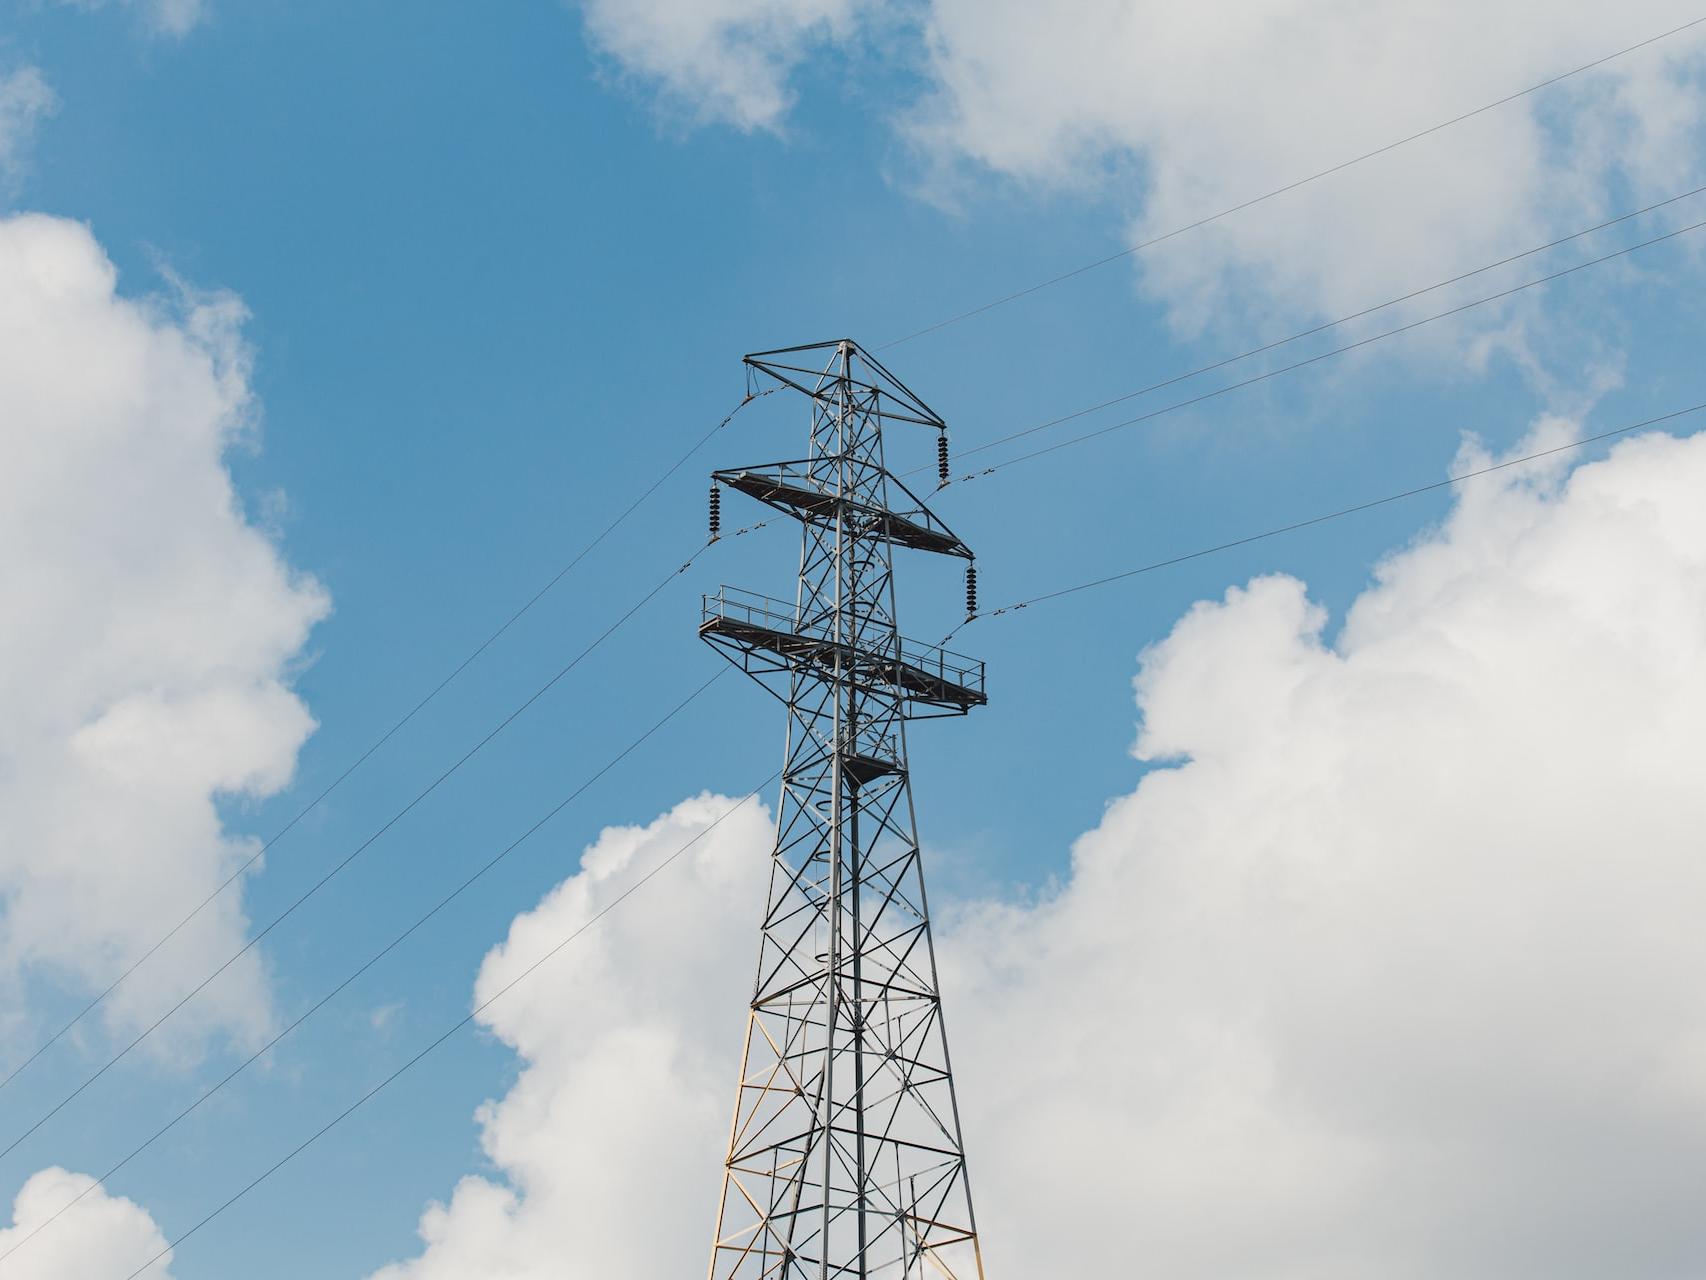 black metal tower under blue sky and white clouds during daytime